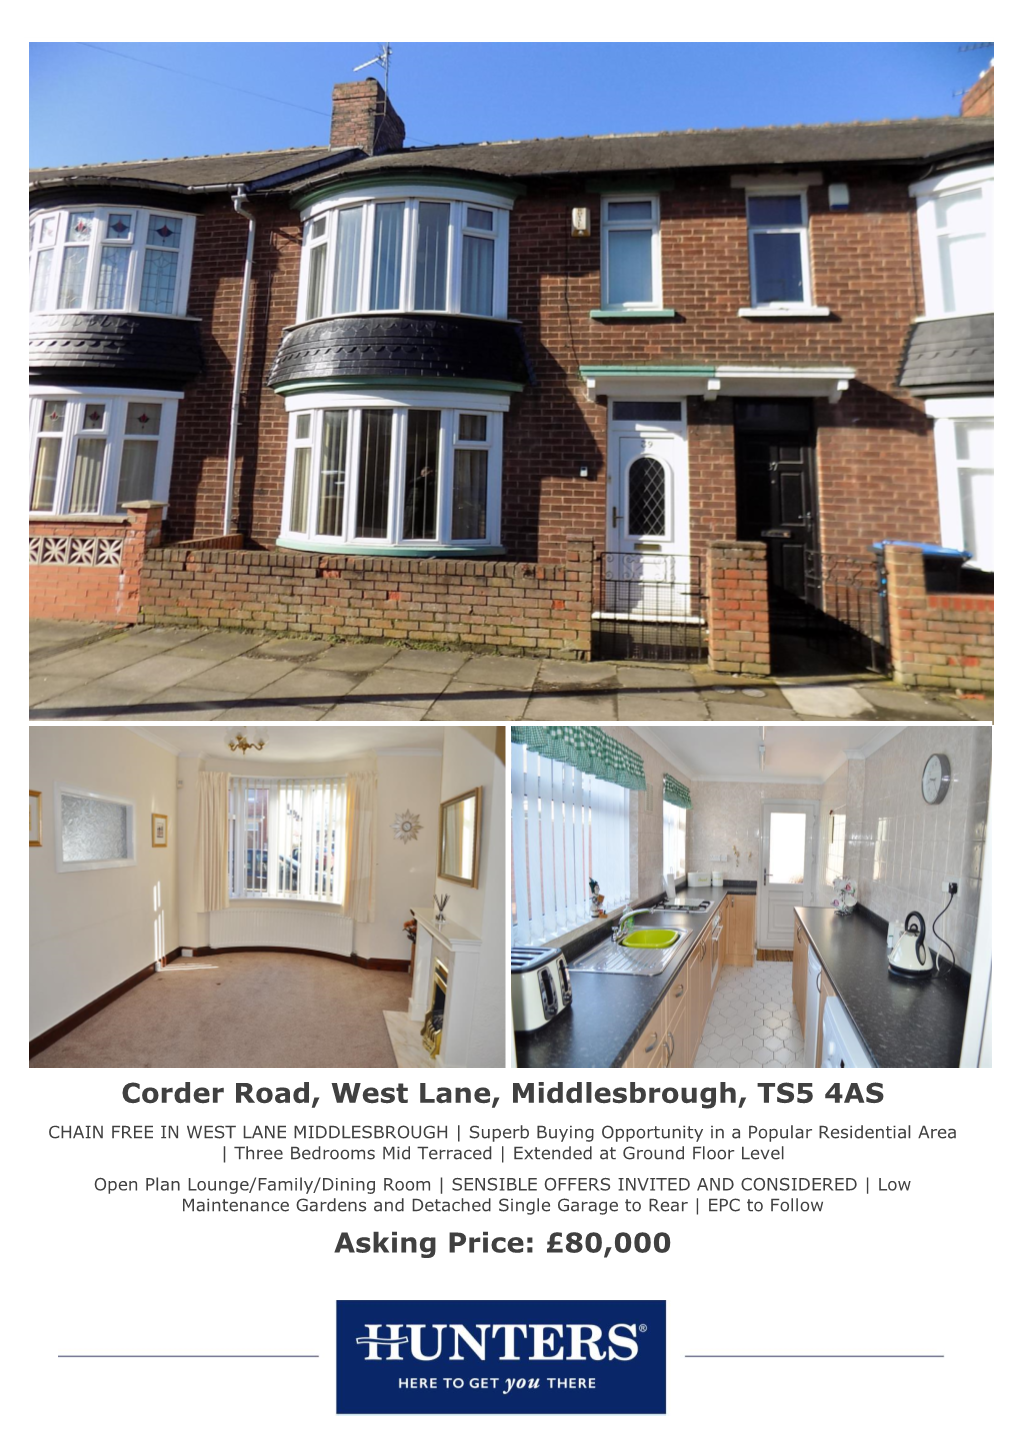 Corder Road, West Lane, Middlesbrough, TS5 4AS Asking Price